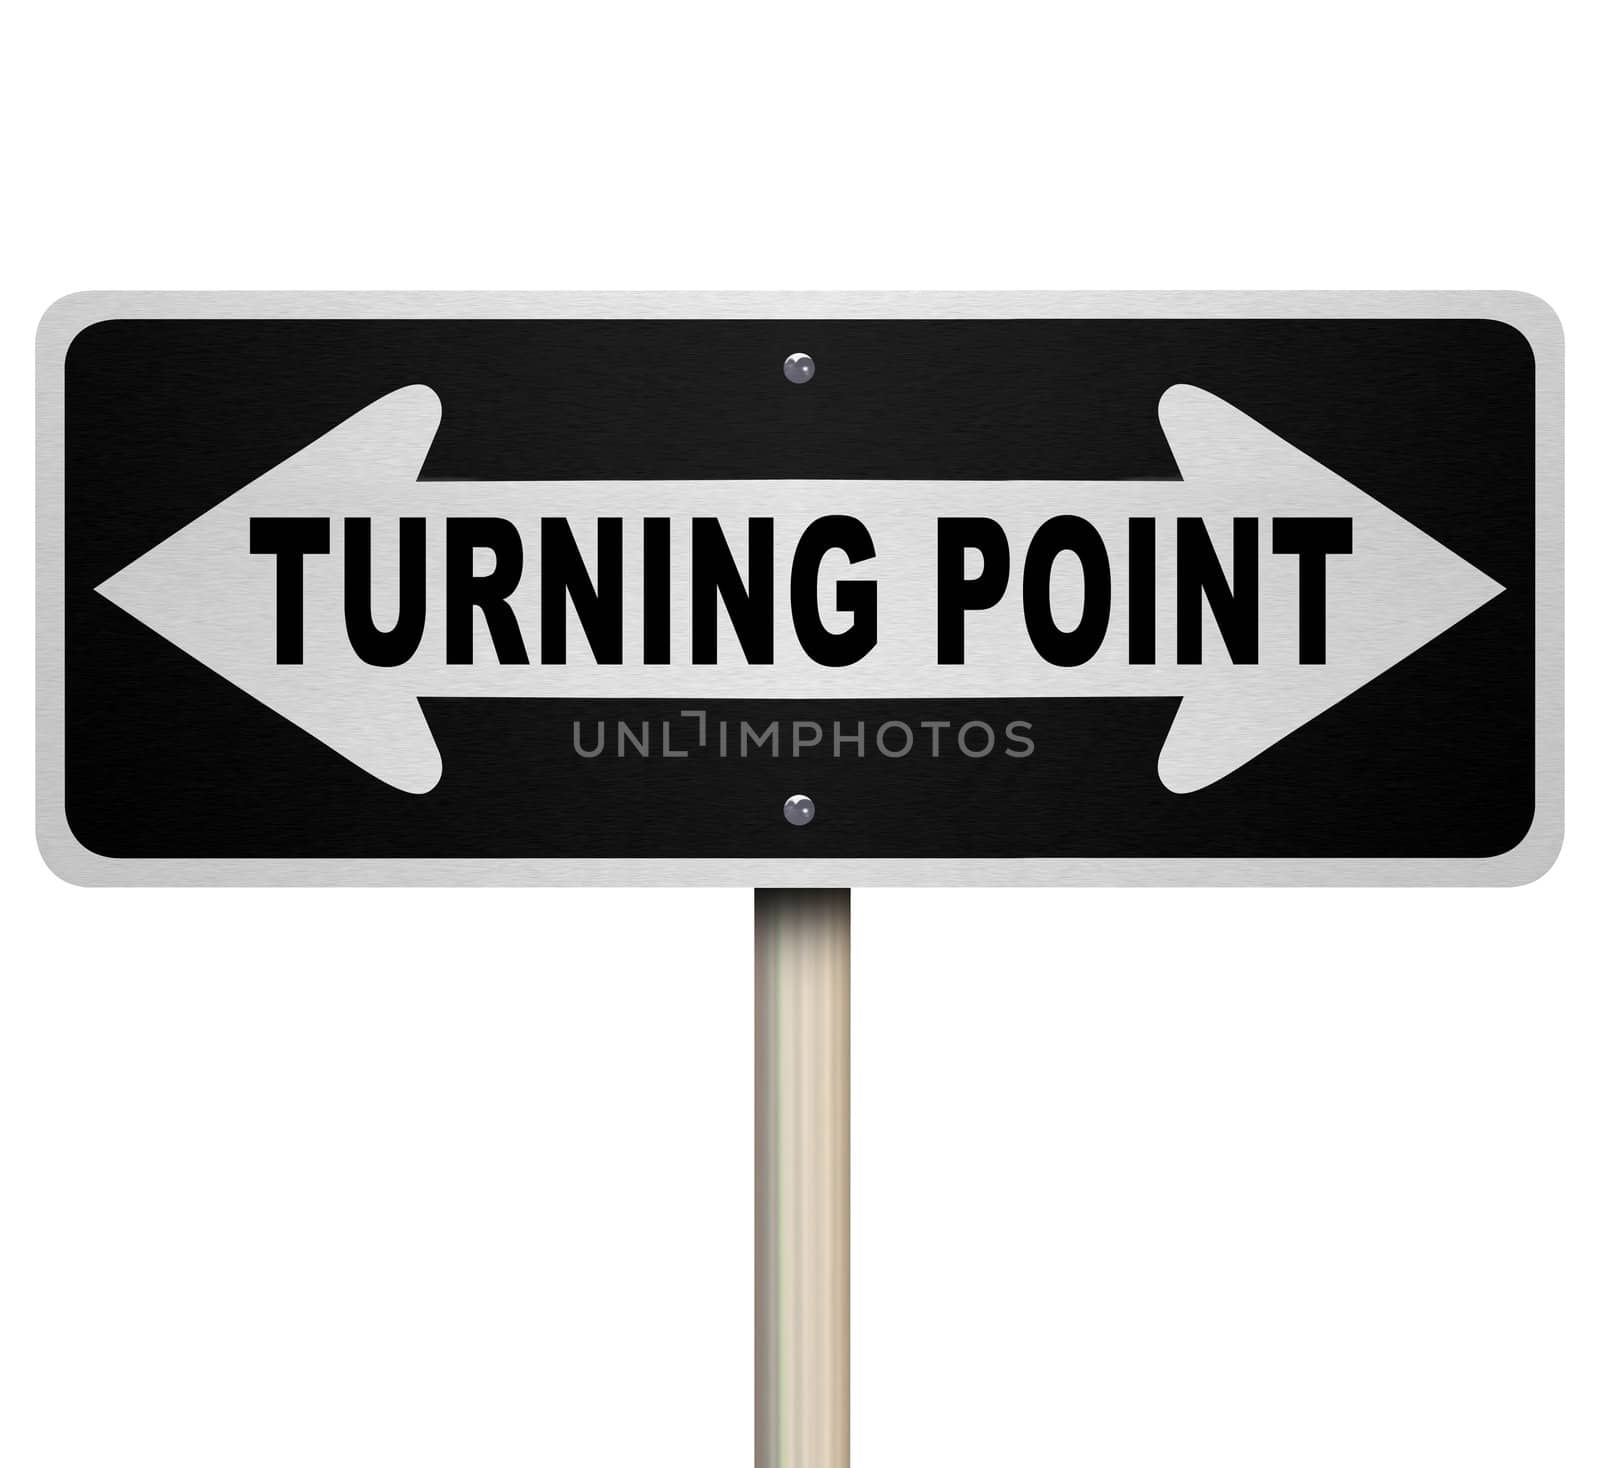 A road sign with the words Turning Point and arrows pointing left and right representing an important moment for you to make a major decision that will have big impact on your life or career